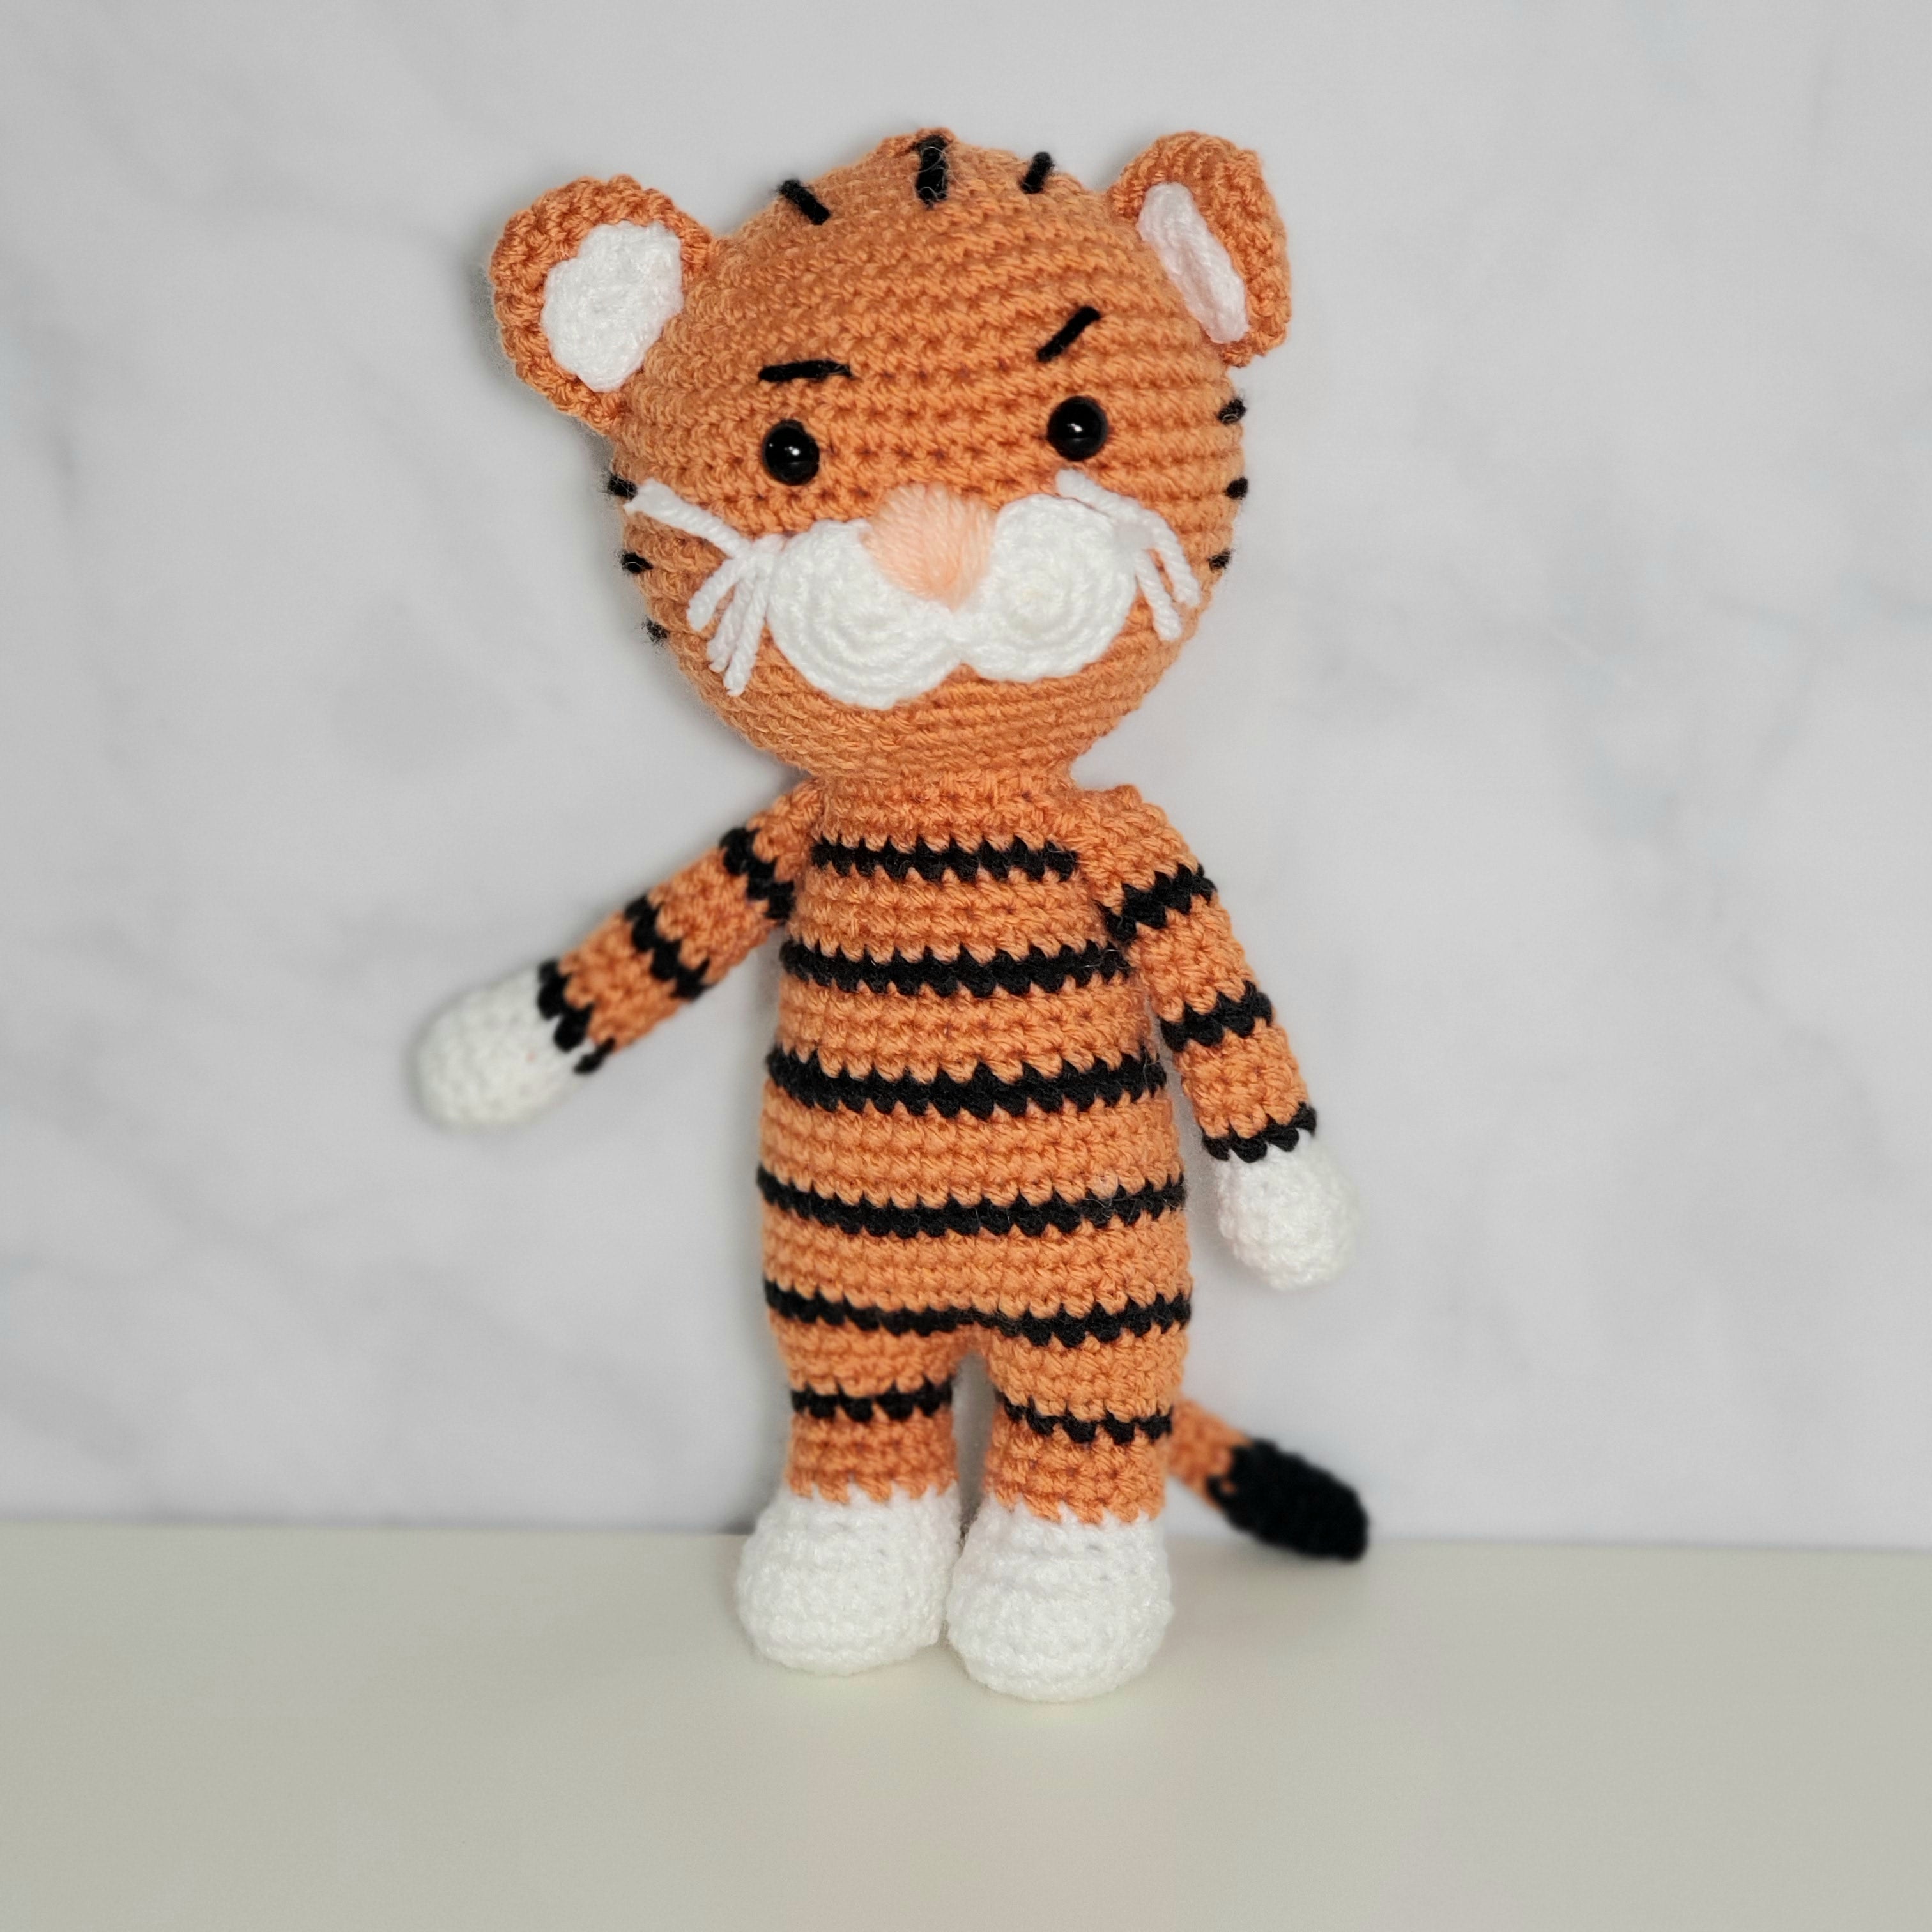 Tiger Plush Toy - 10 Inches